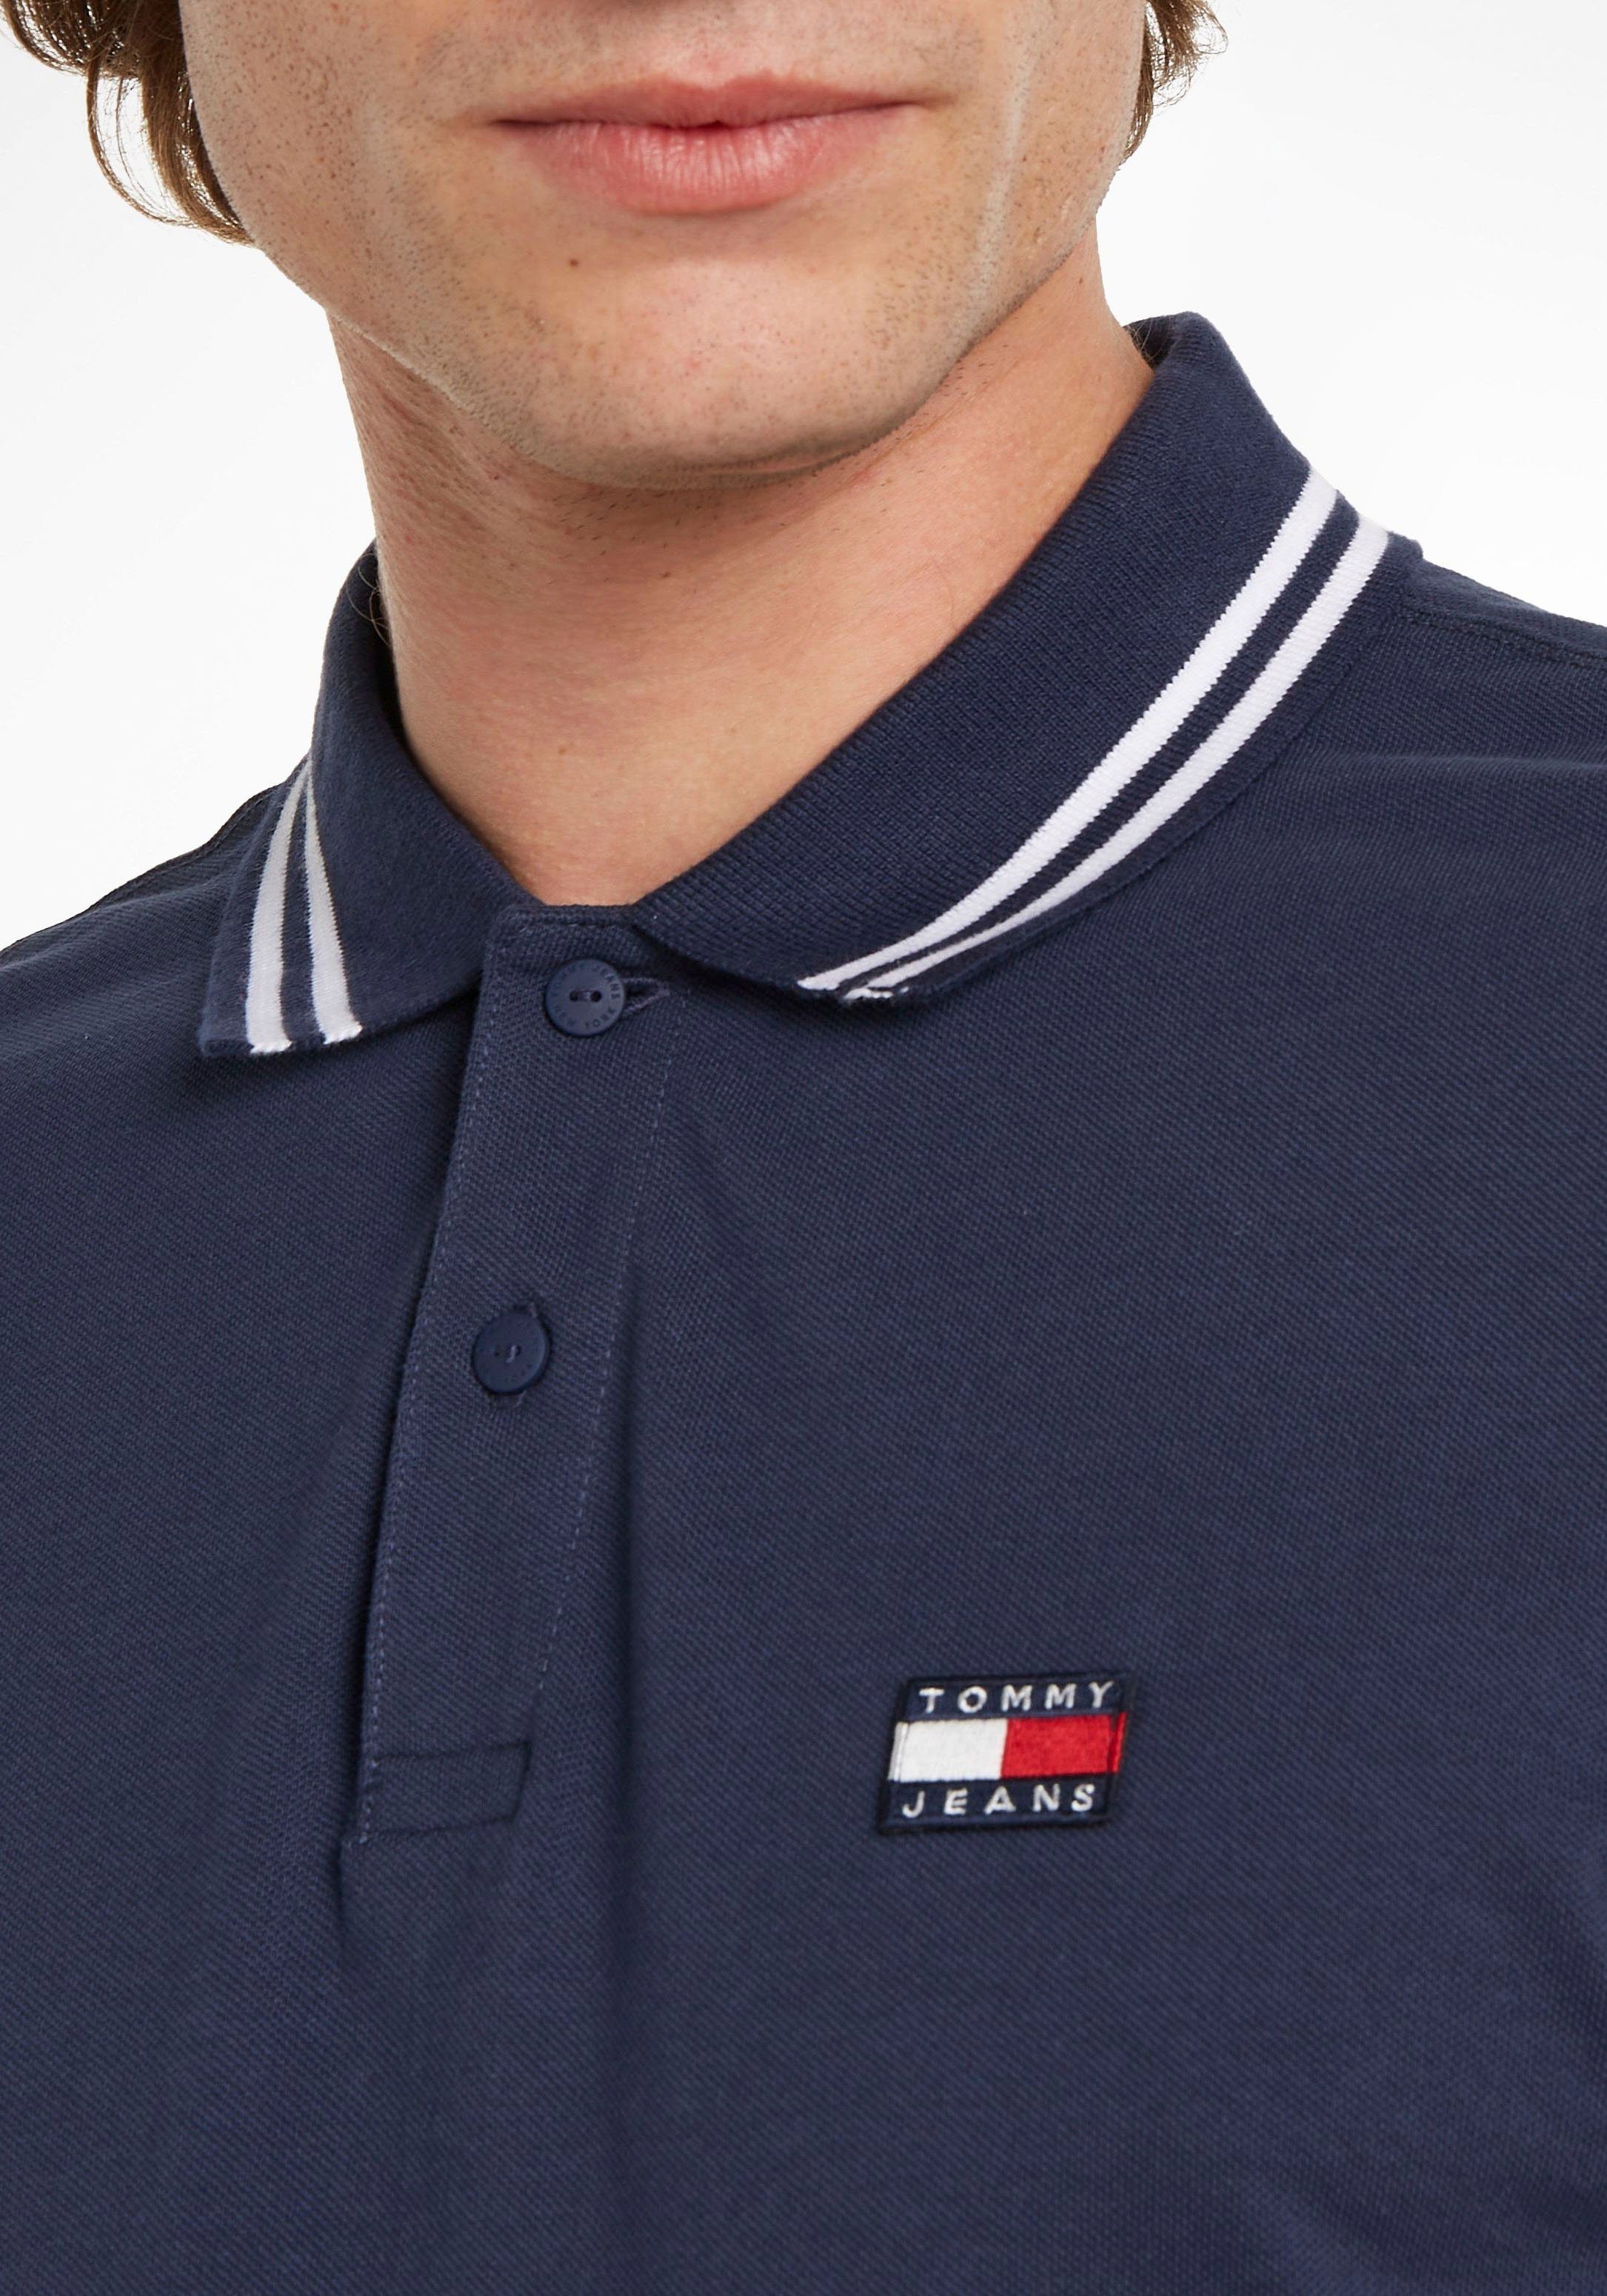 Jeans Navy CLSC POLO Tommy Poloshirt TIPPING Twilight TJM DETAIL